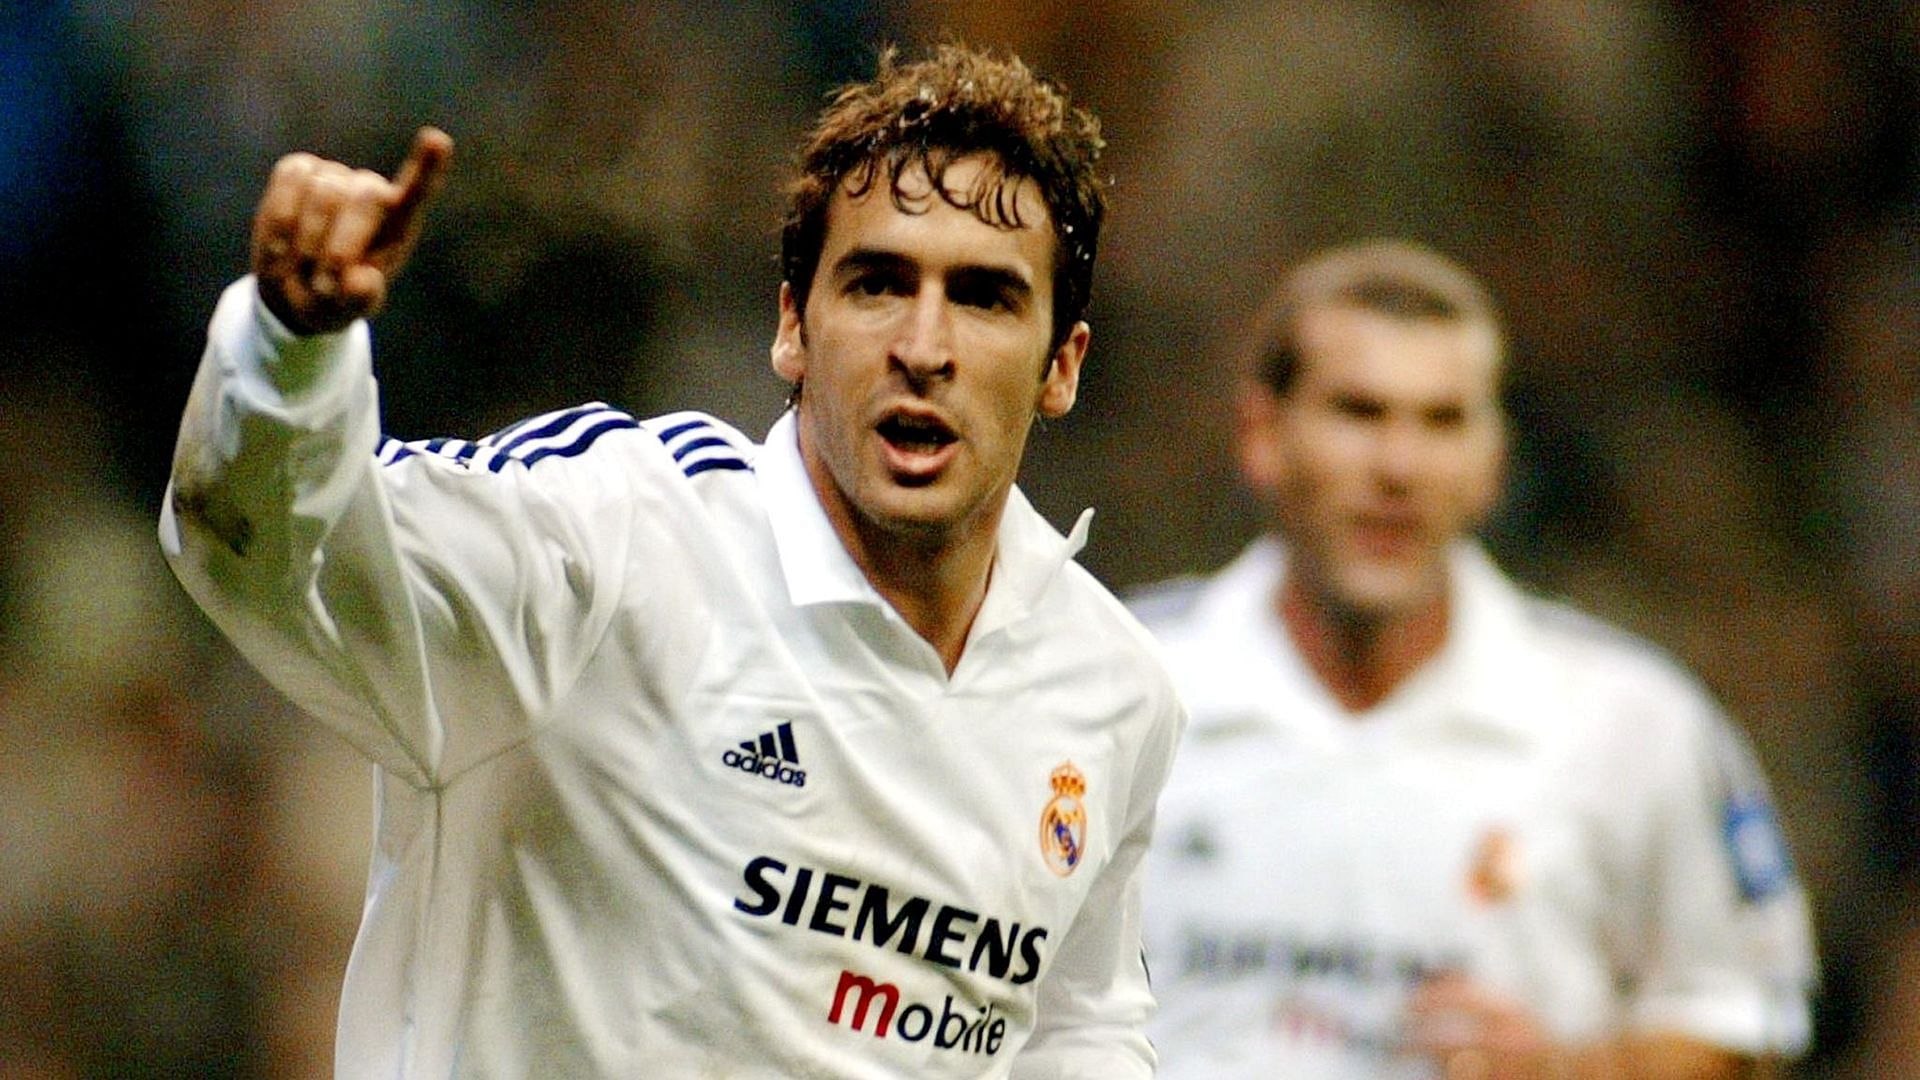 Raul won three Champions League crowns in his exceptional career